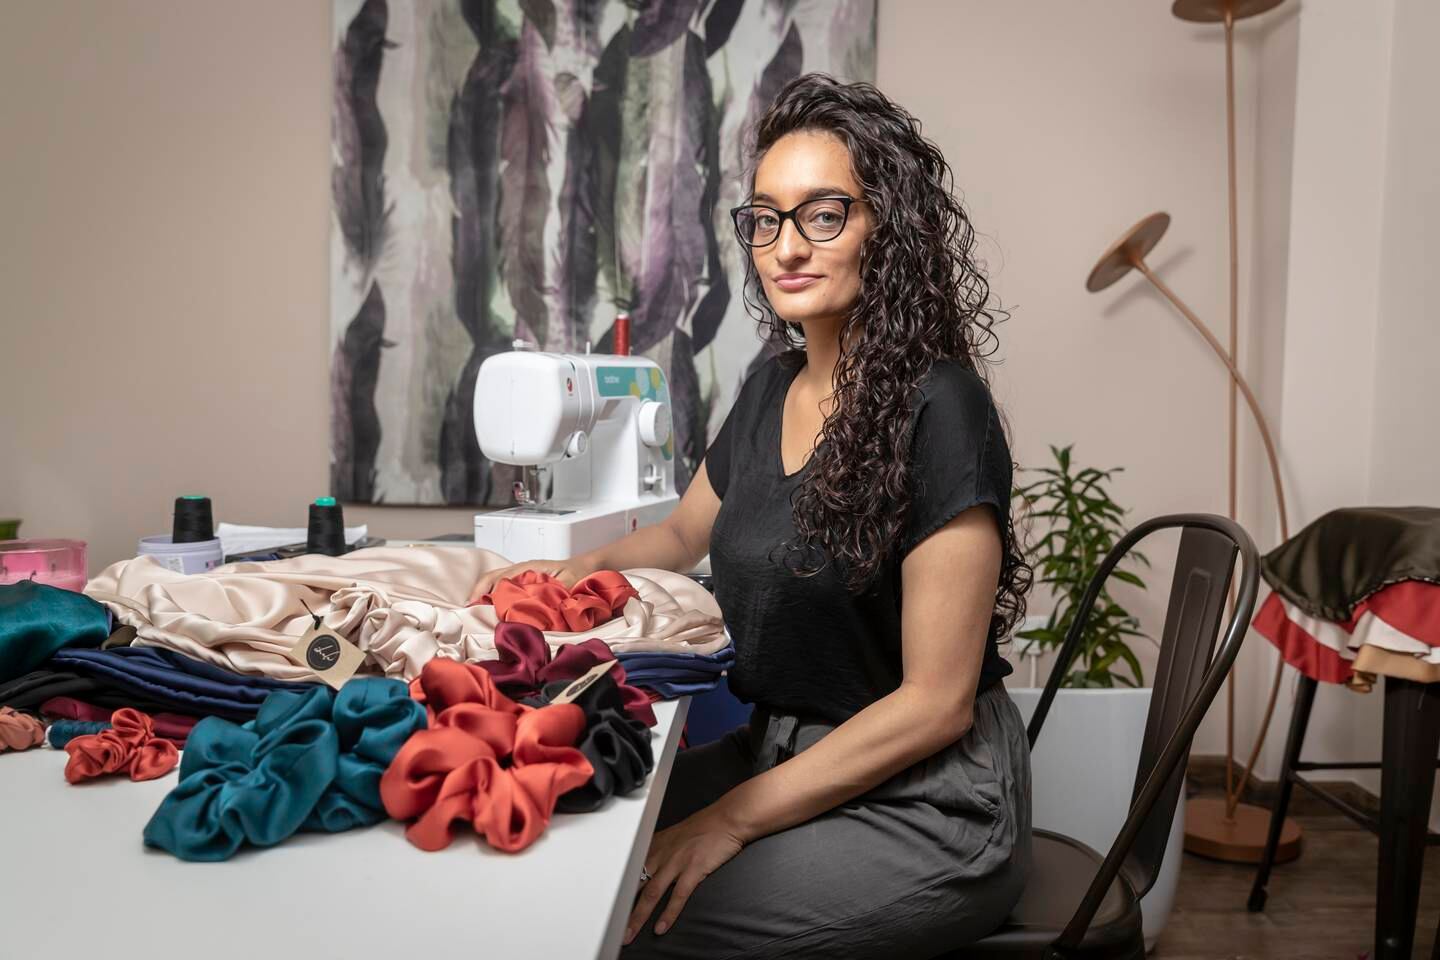 Nadine Gauder, who was with Emirates airline for 12 years, now runs e-commerce brand Ihala, supplying sustainably packed hair, beauty and personal care products. Photo: Antonie Robertson / The National